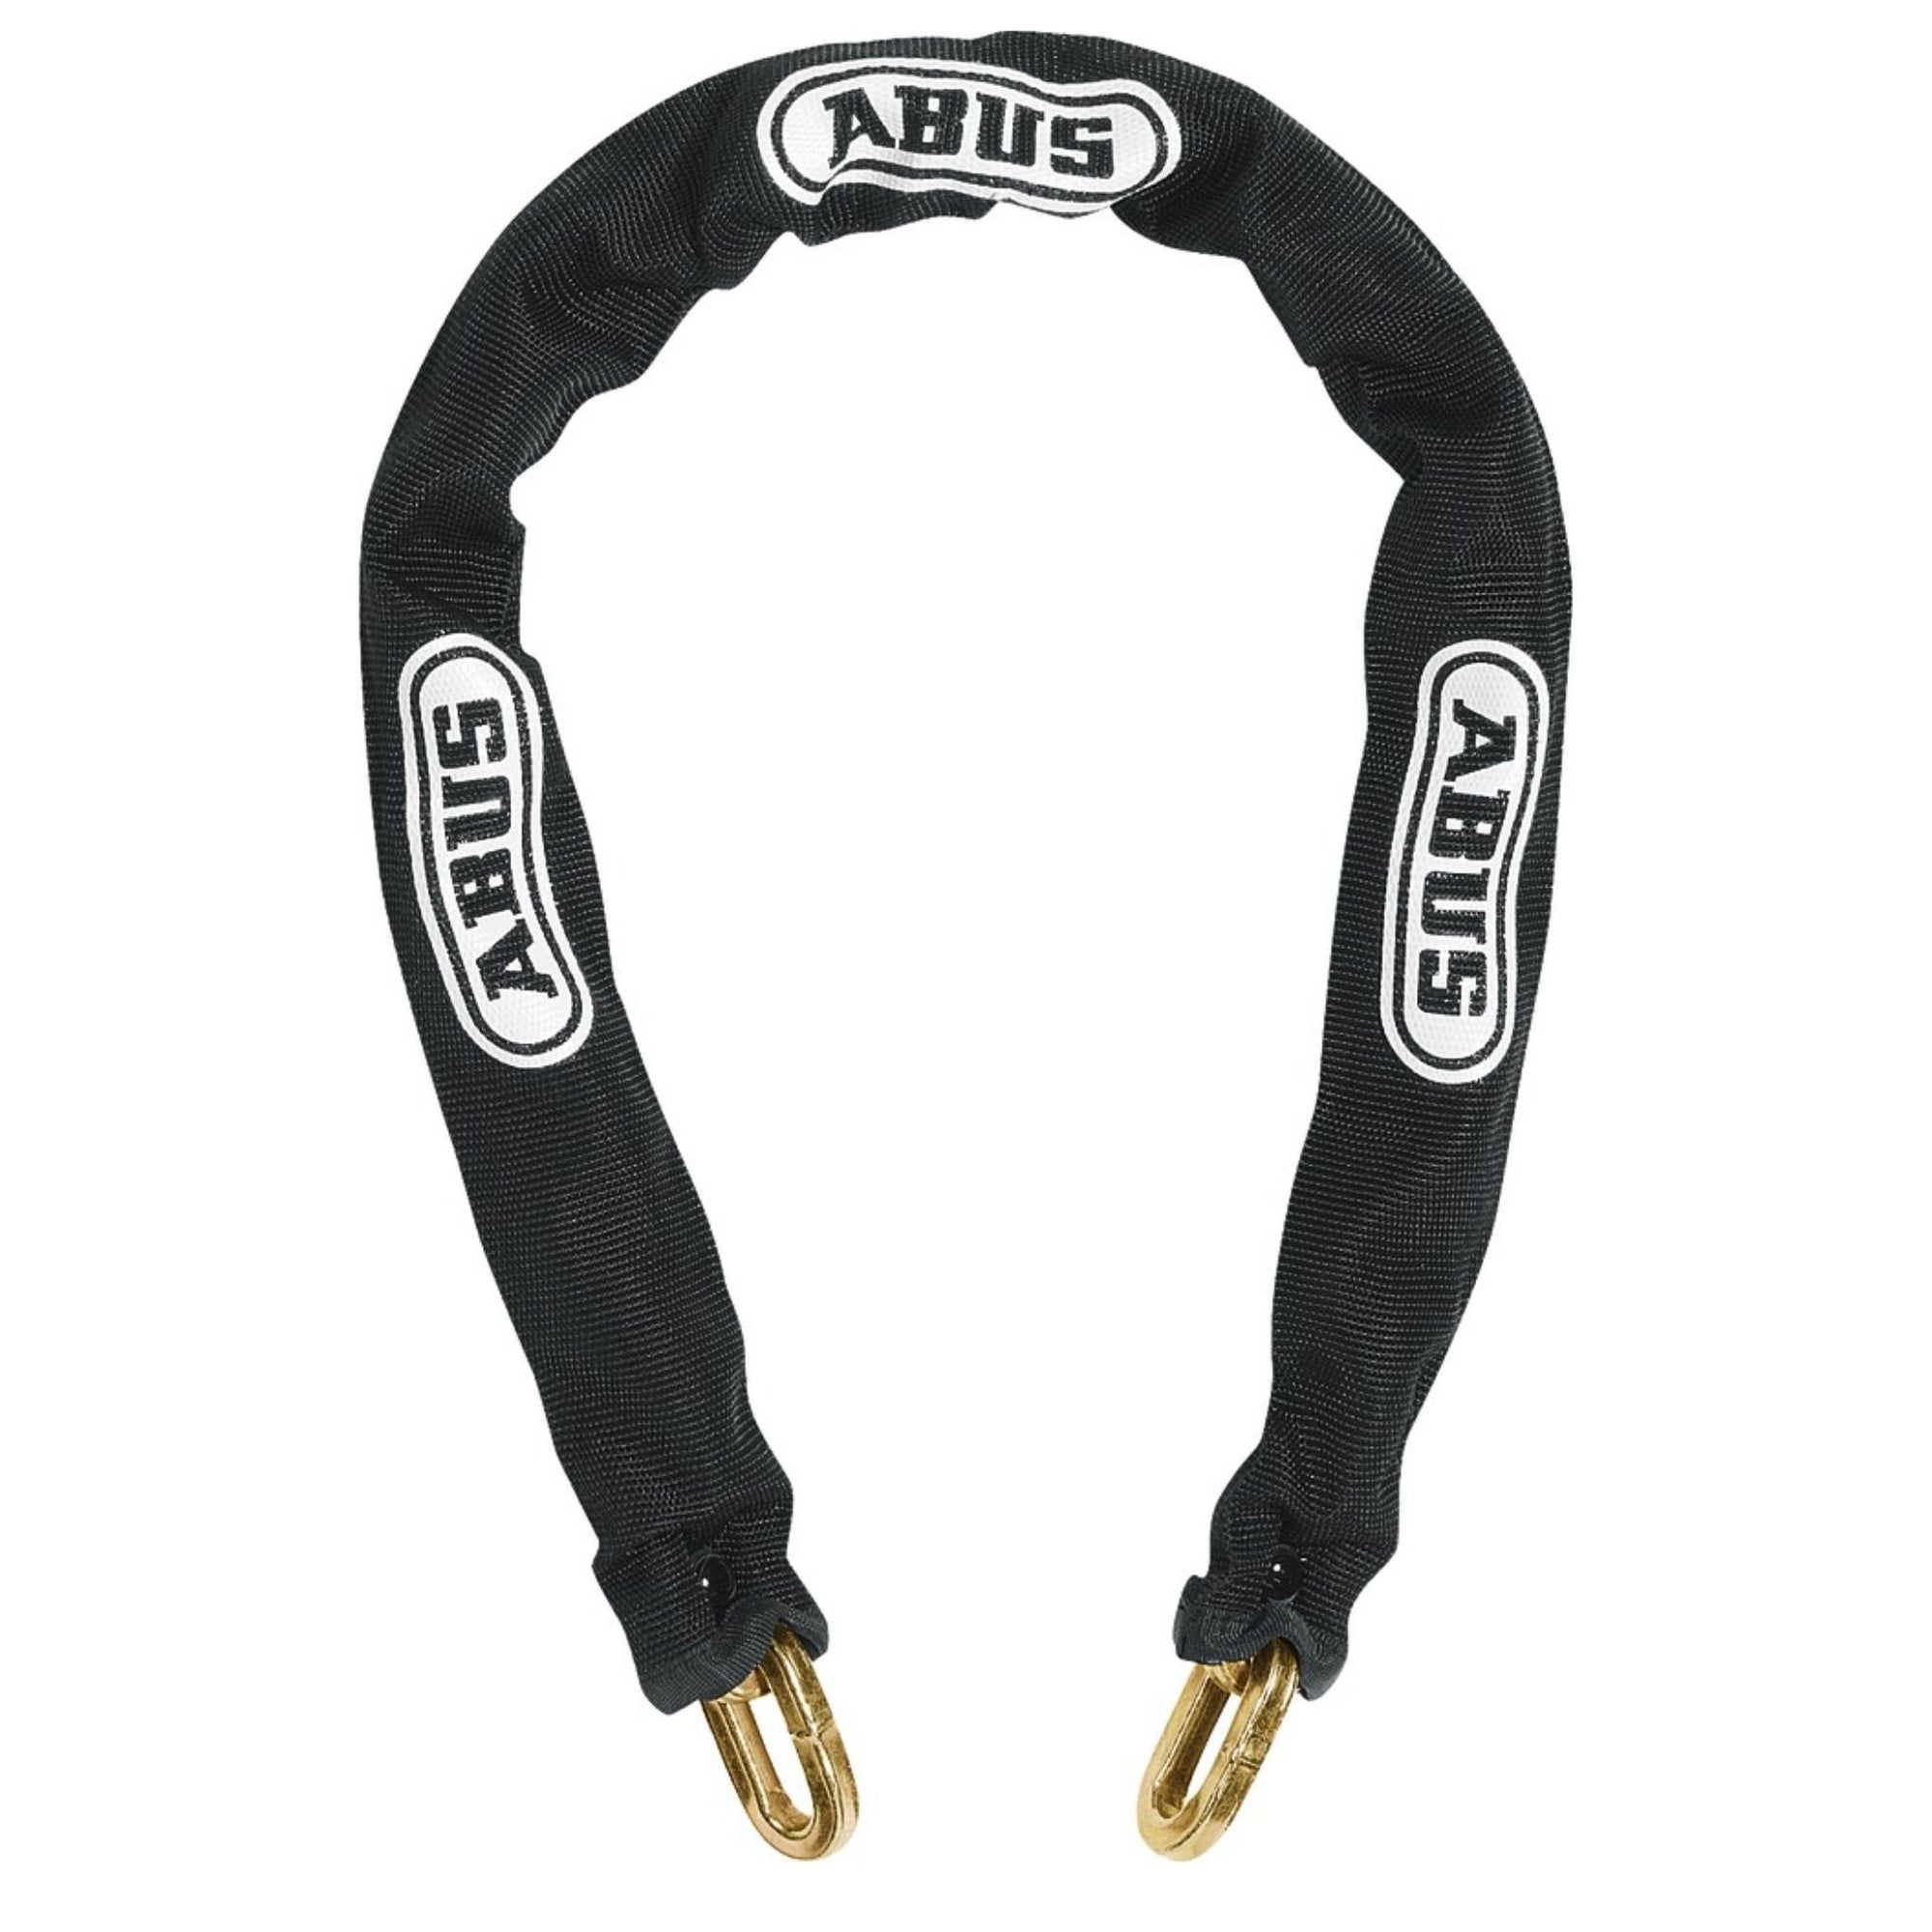 Abus 2-Foot Chain with Fitted Nylon Sleeve 1/4" Thick (6KS) Pre-Cut Chains - The Lock Source